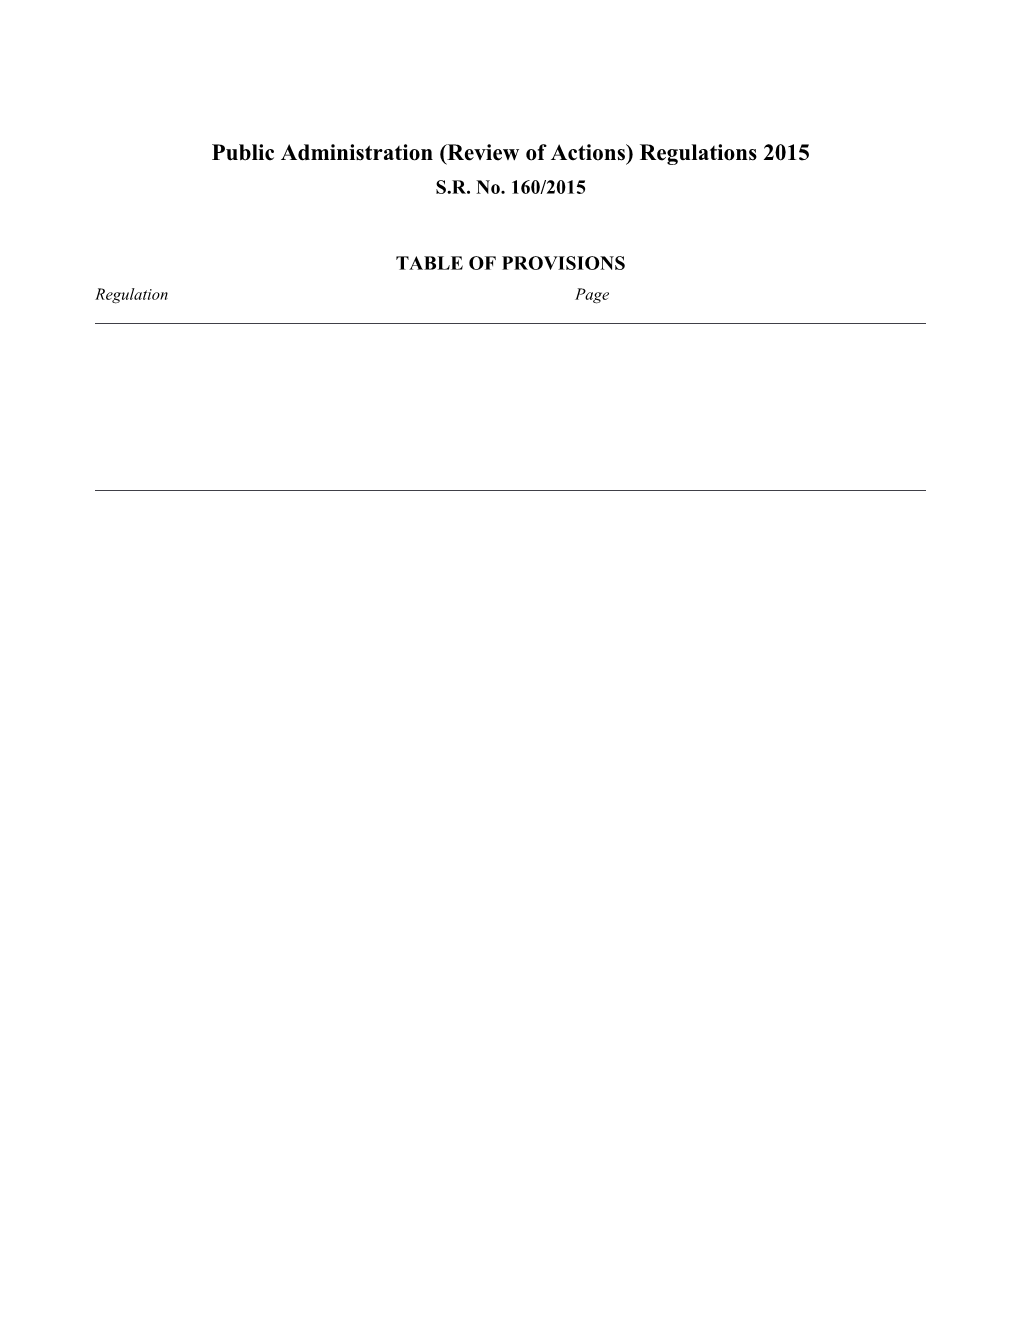 Public Administration (Review of Actions) Regulations 2015